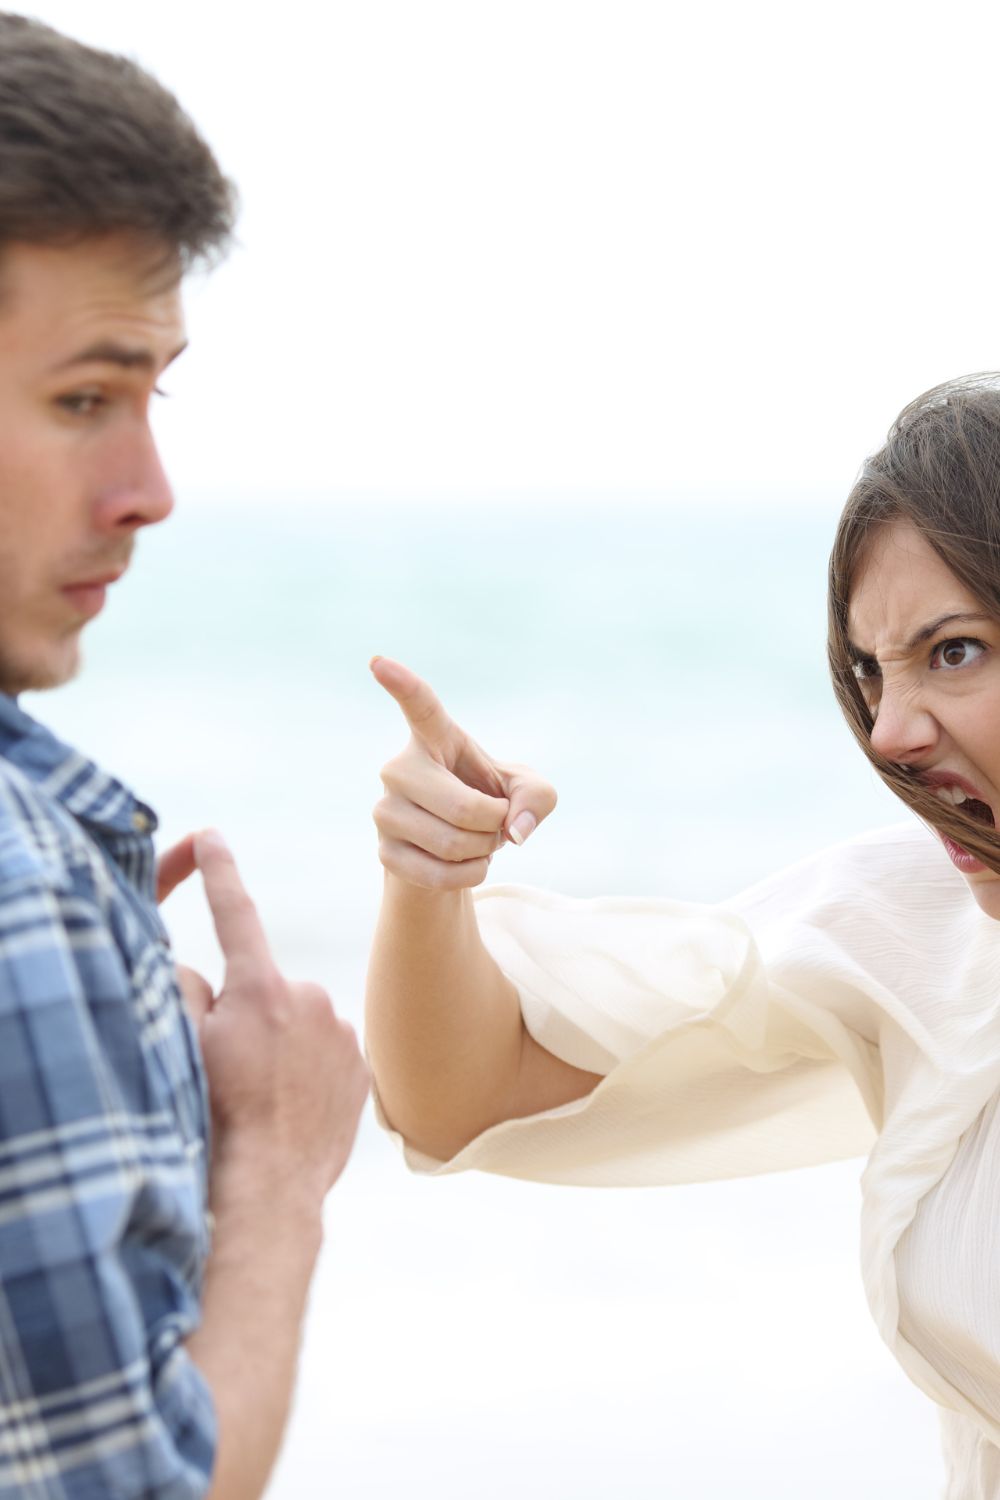 14 Things your partner should never say to you